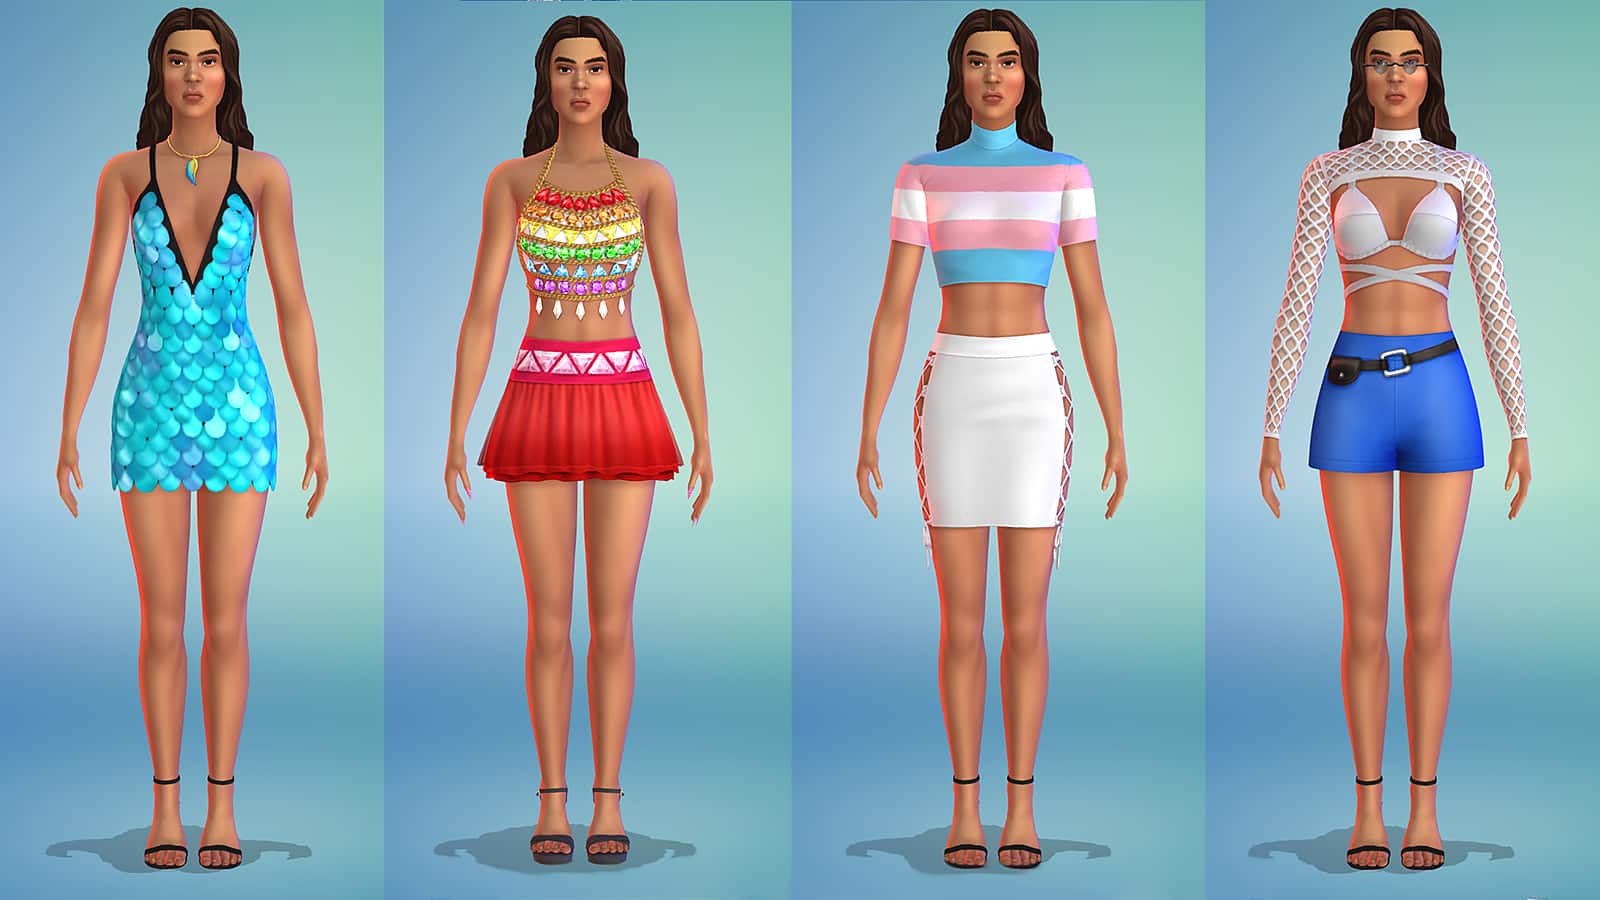 Images of the Feminine framed CAS items in The Sims 4 Carnaval Streetwear Kit